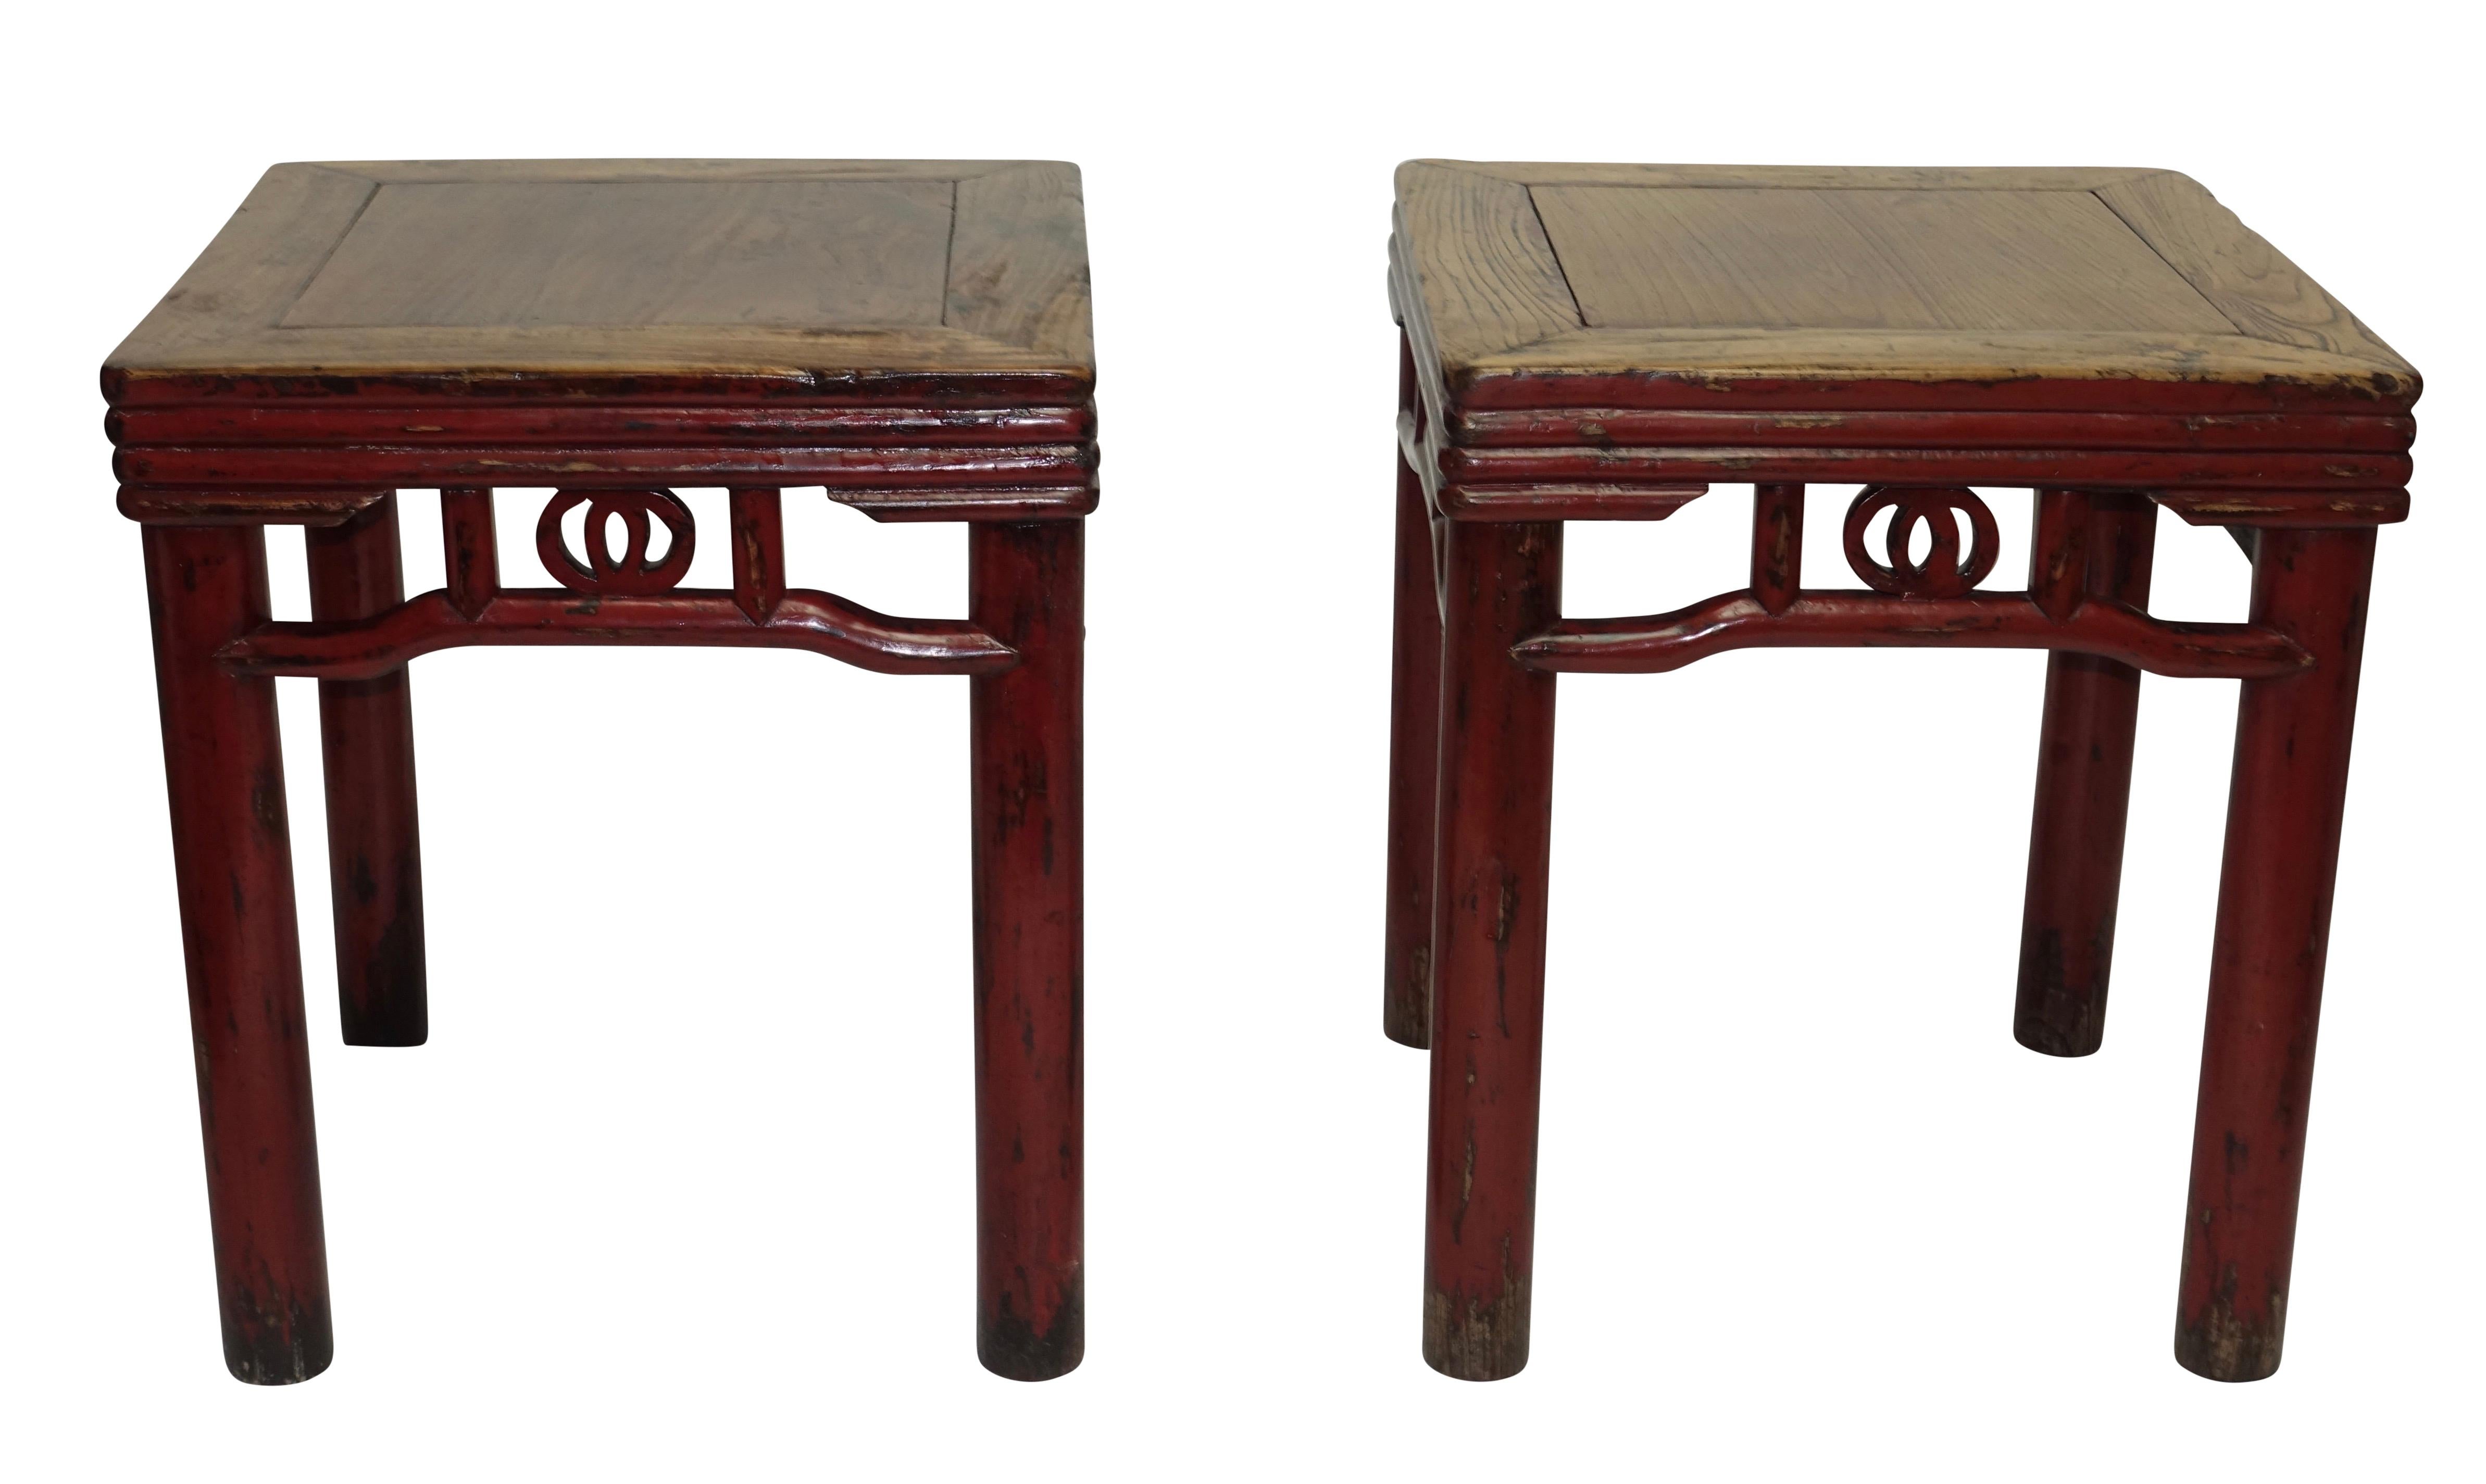 A pair of red lacquered elmwood stools or side tables with ribbed apron above concentric circular legs. China, Qing dynasty late 19th century.